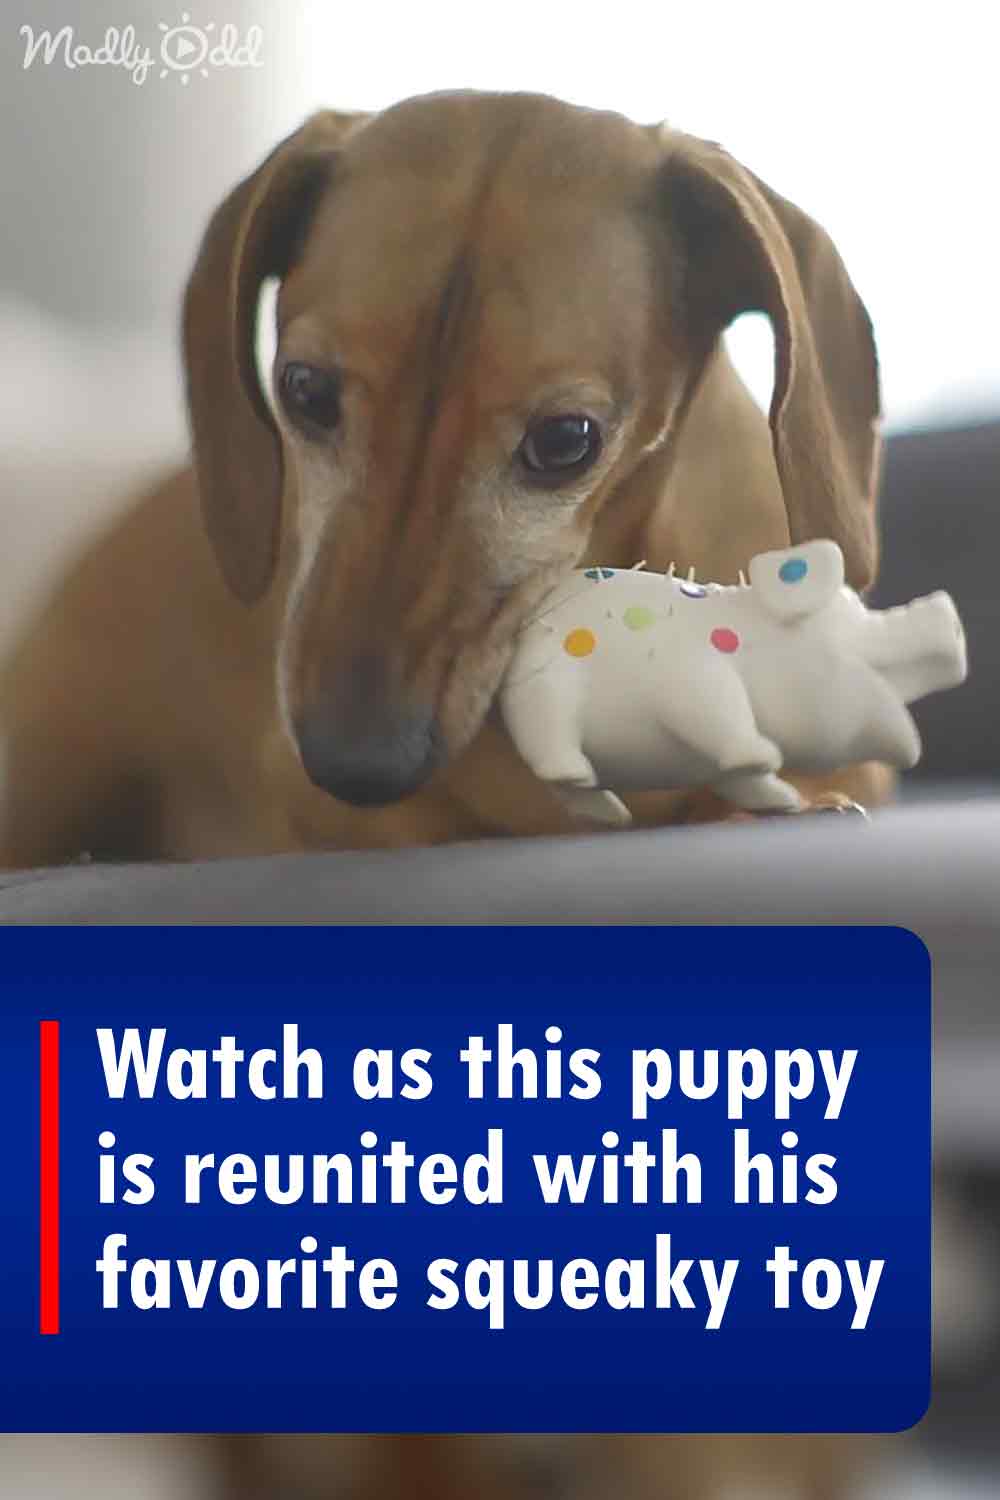 Watch as this puppy is reunited with his favorite squeaky toy